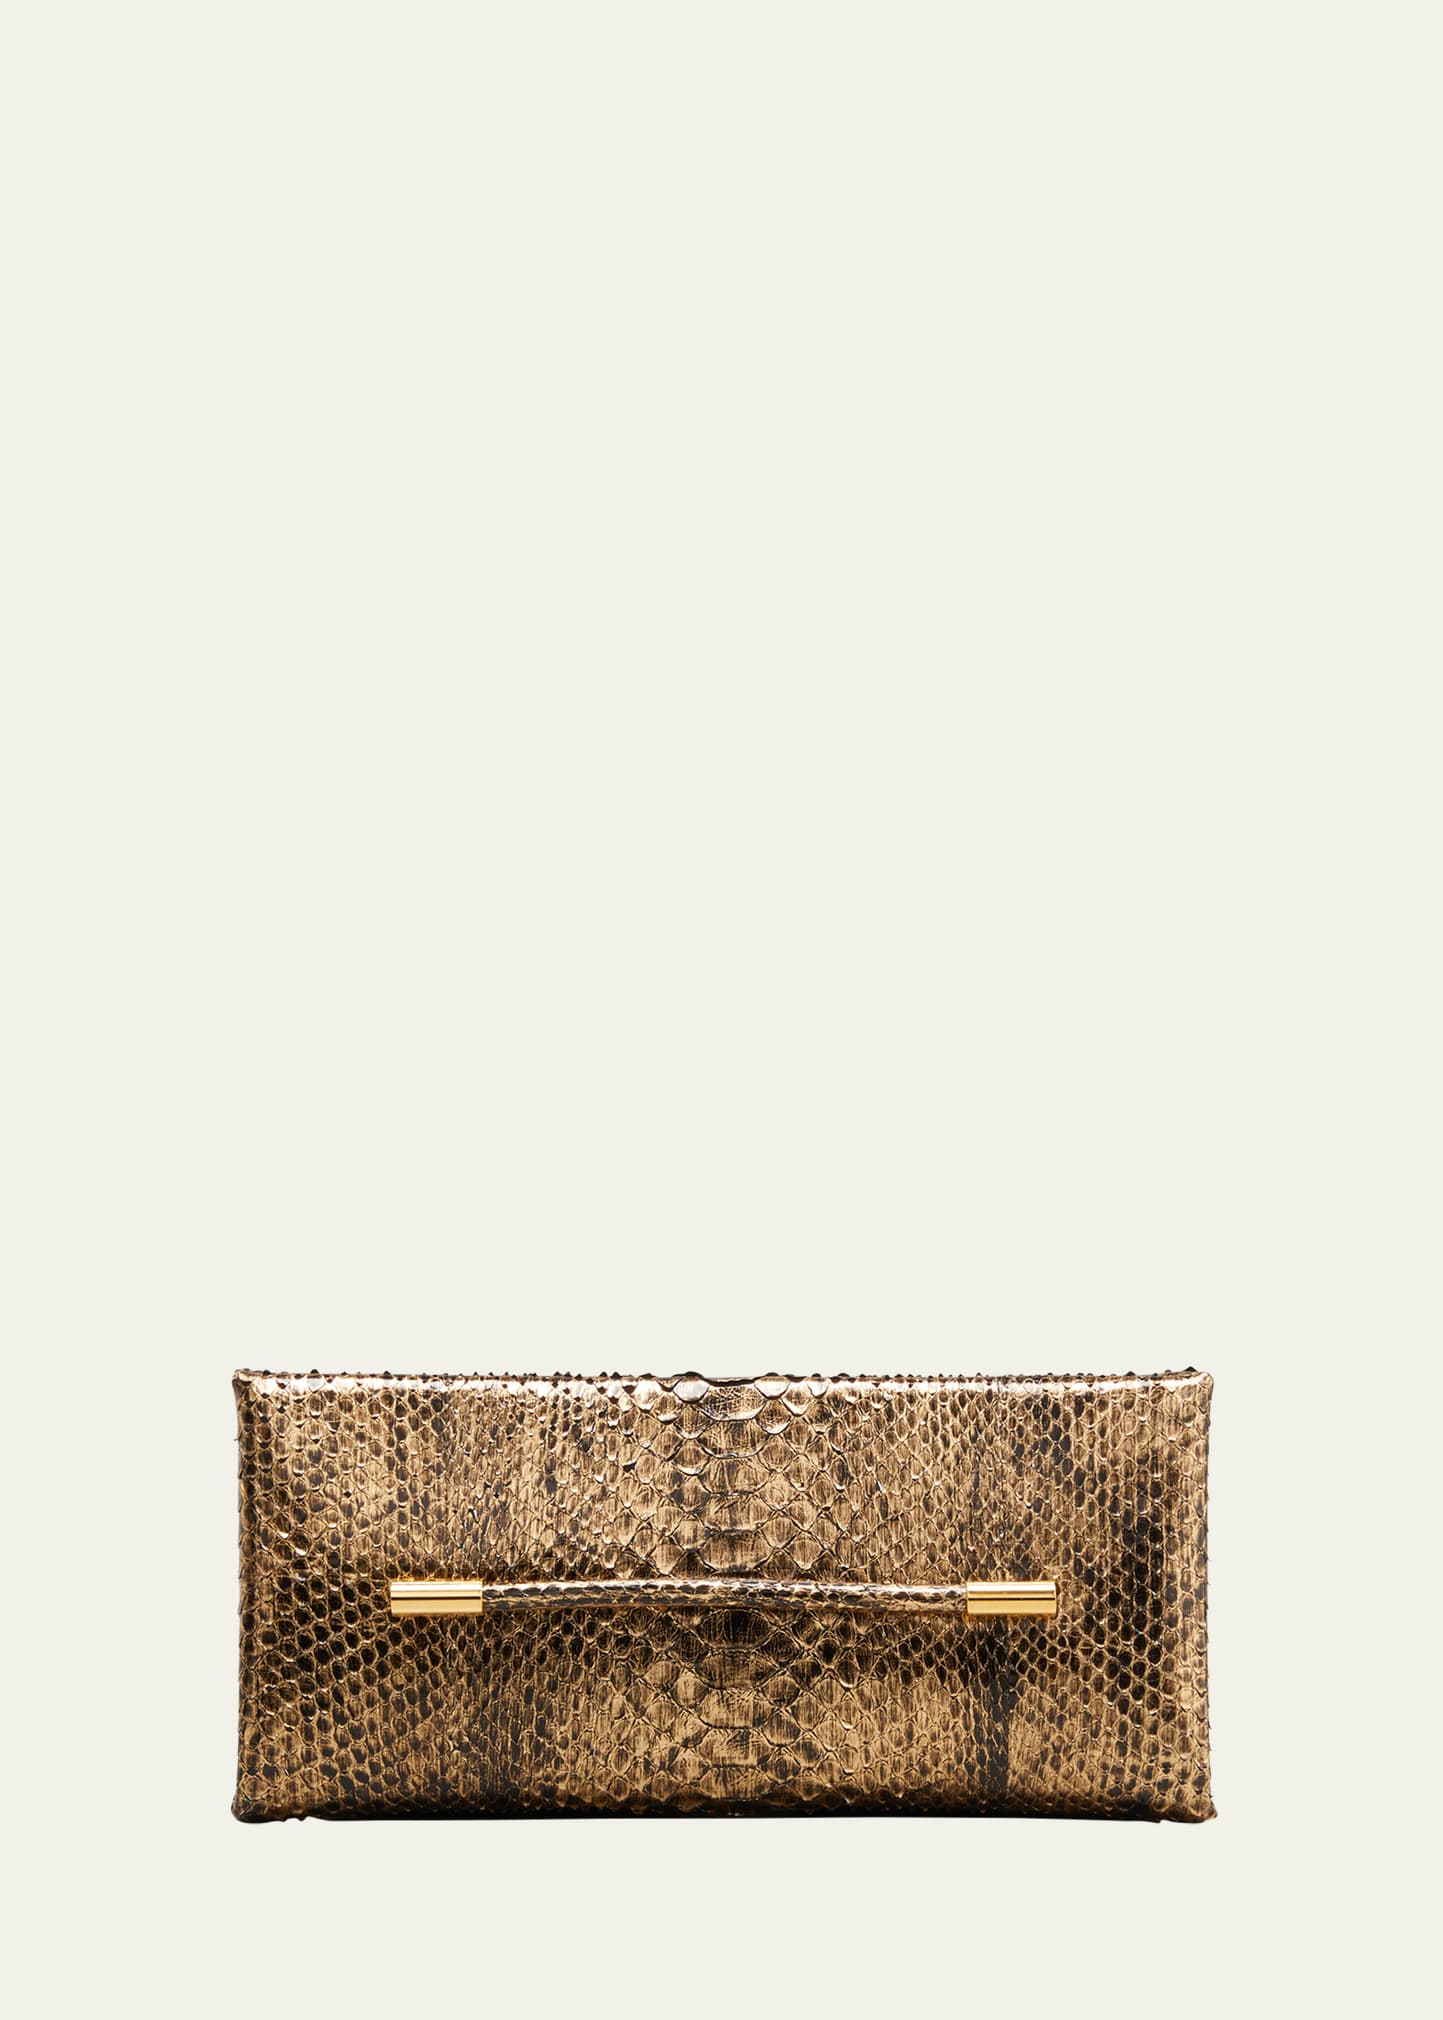 Tom Ford Ava Python Clutch Bag In Gold